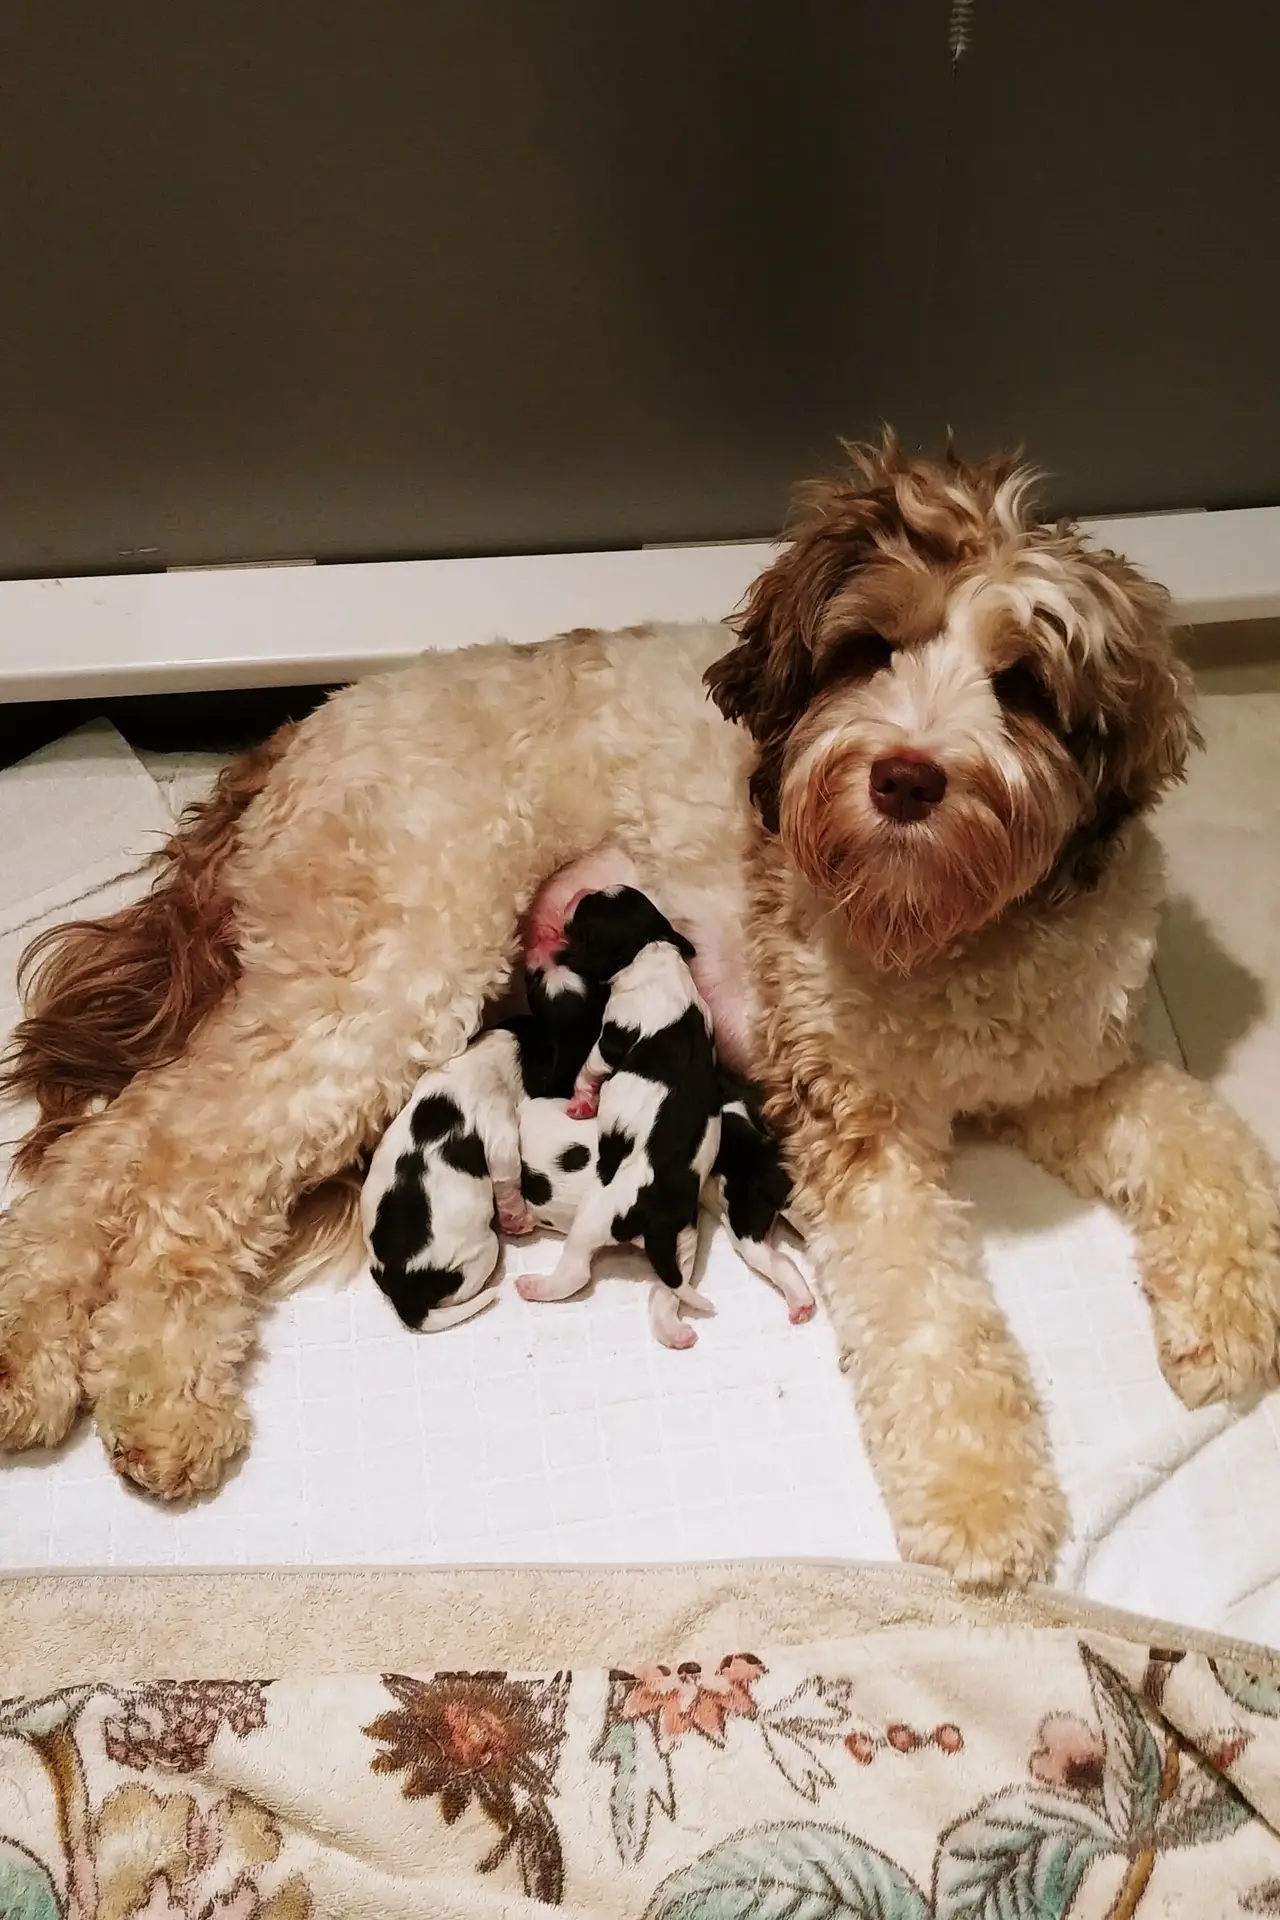 Photo taken from birds eye view, a Sable Parti pattern Labradoodle Mom is looking at the camera while nested against her tummy are 4 newborn parti pattern puppies (black and white). They are all lying on a white blanket.